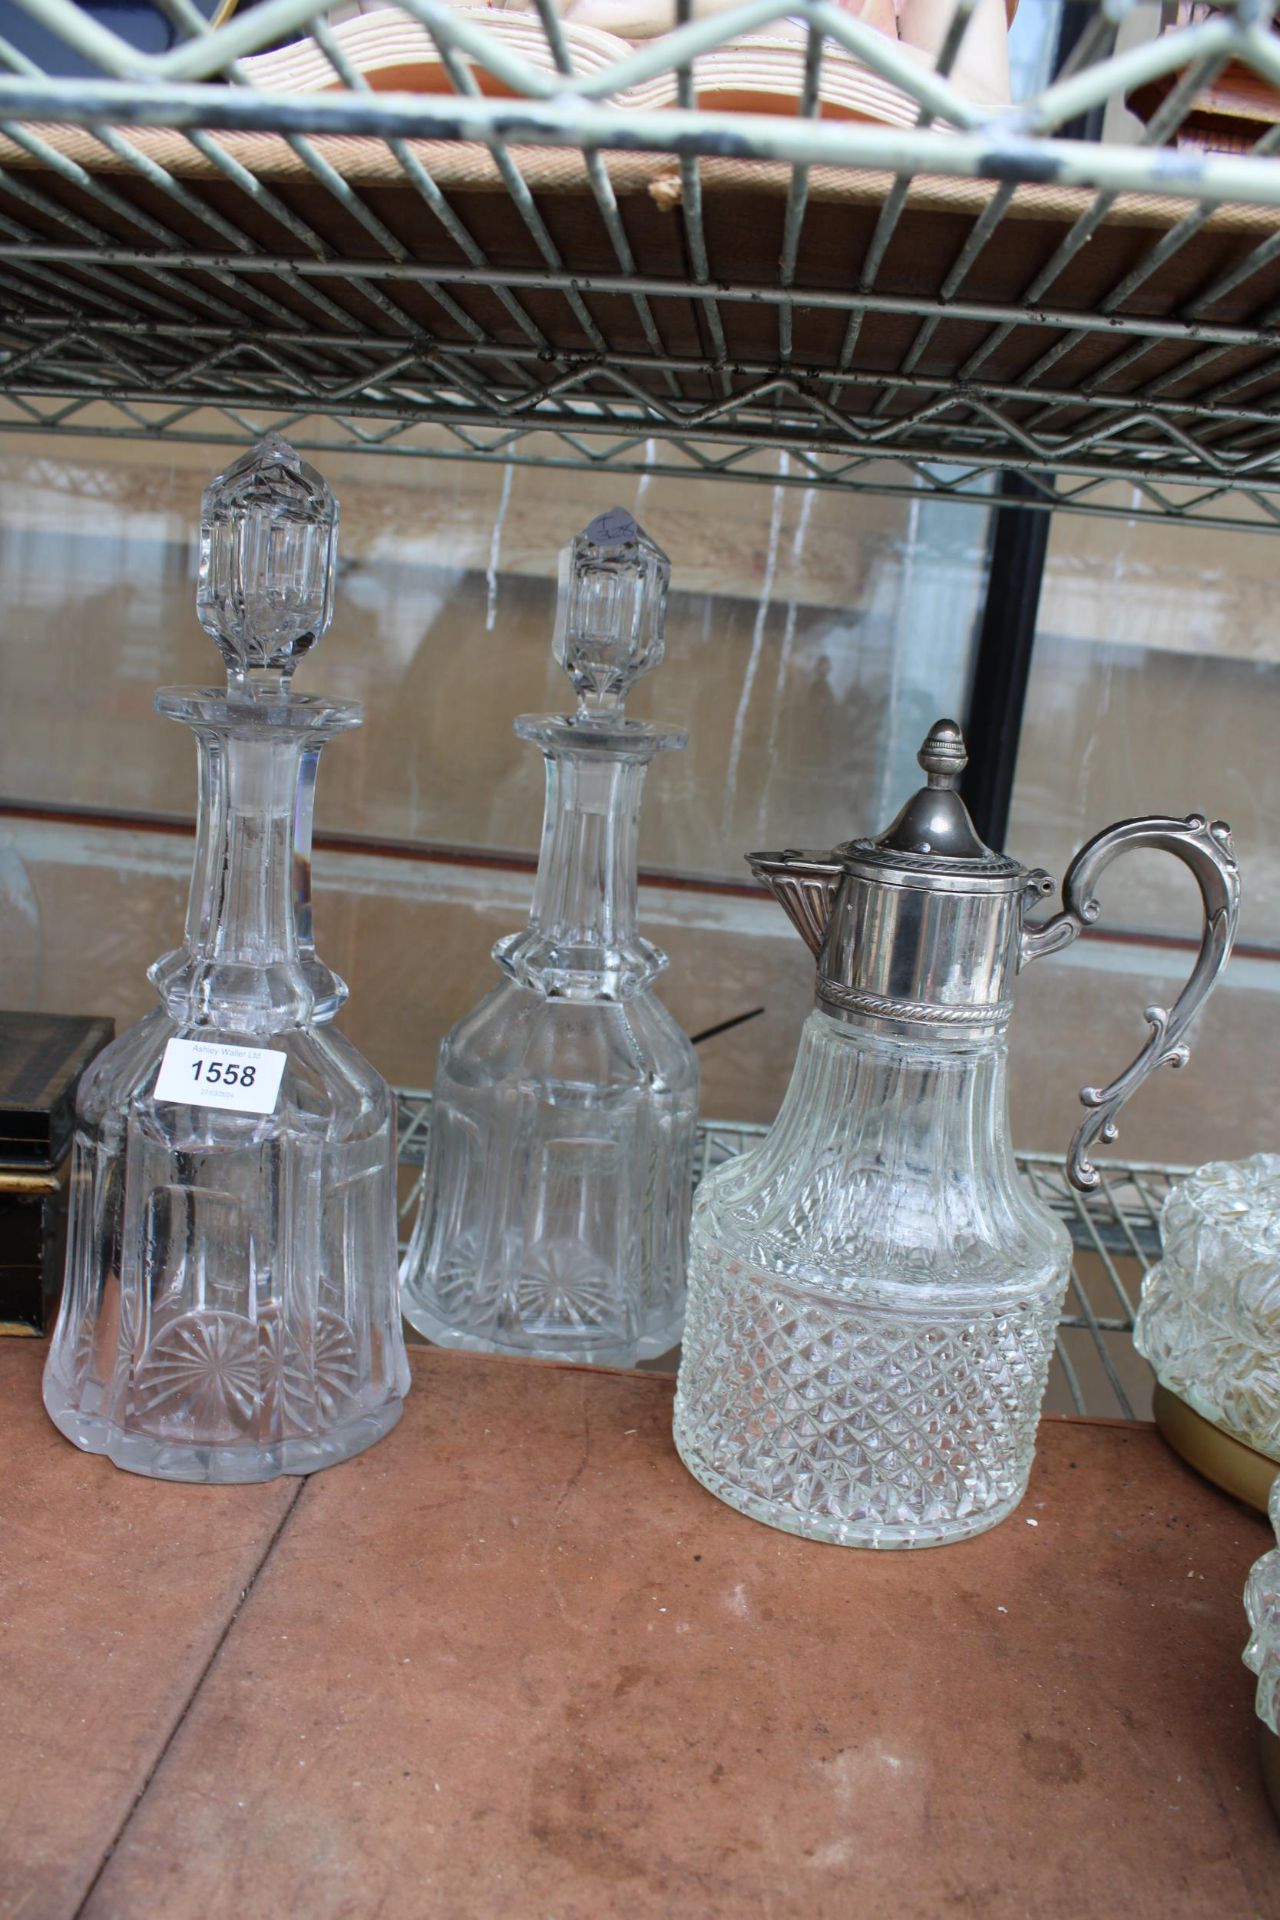 TWO GLASS DECANTORS AND A CLARET JUG WITH SILVER PLATED TOP